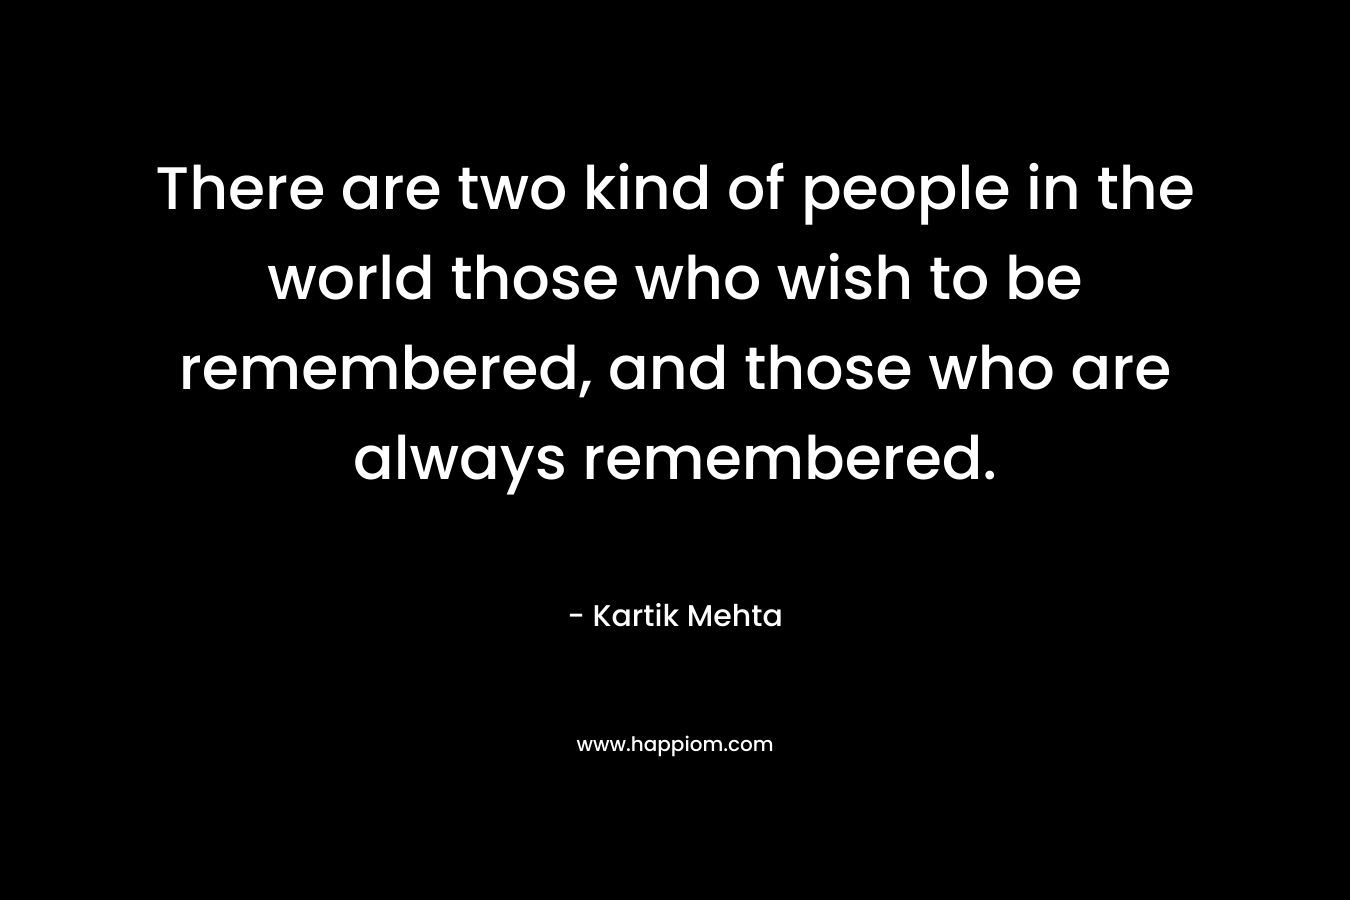 There are two kind of people in the world those who wish to be remembered, and those who are always remembered. – Kartik Mehta